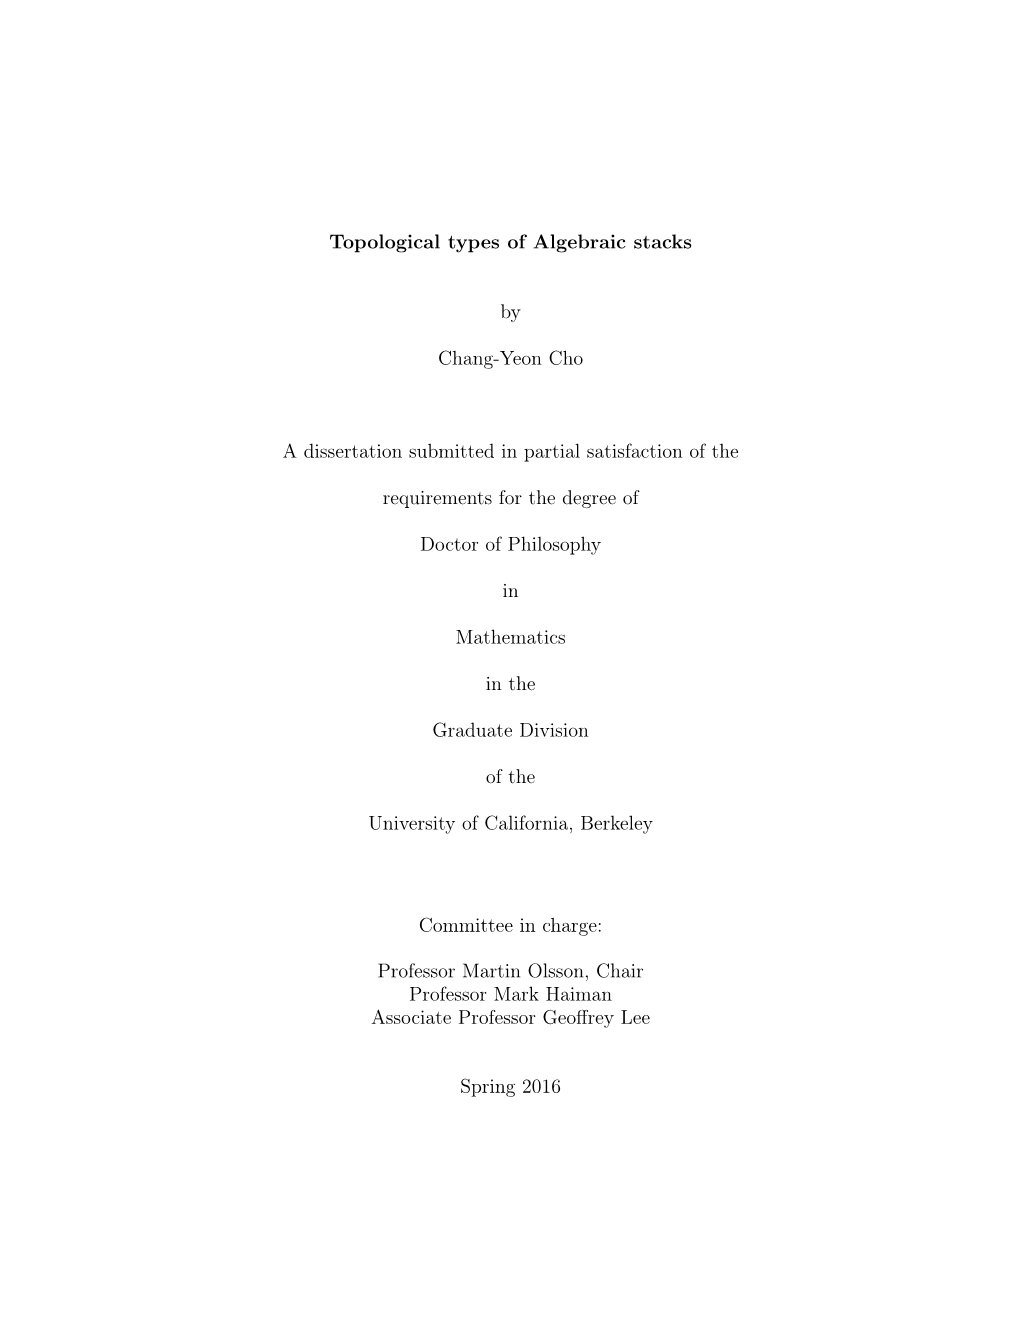 Topological Types of Algebraic Stacks by Chang-Yeon Cho a Dissertation